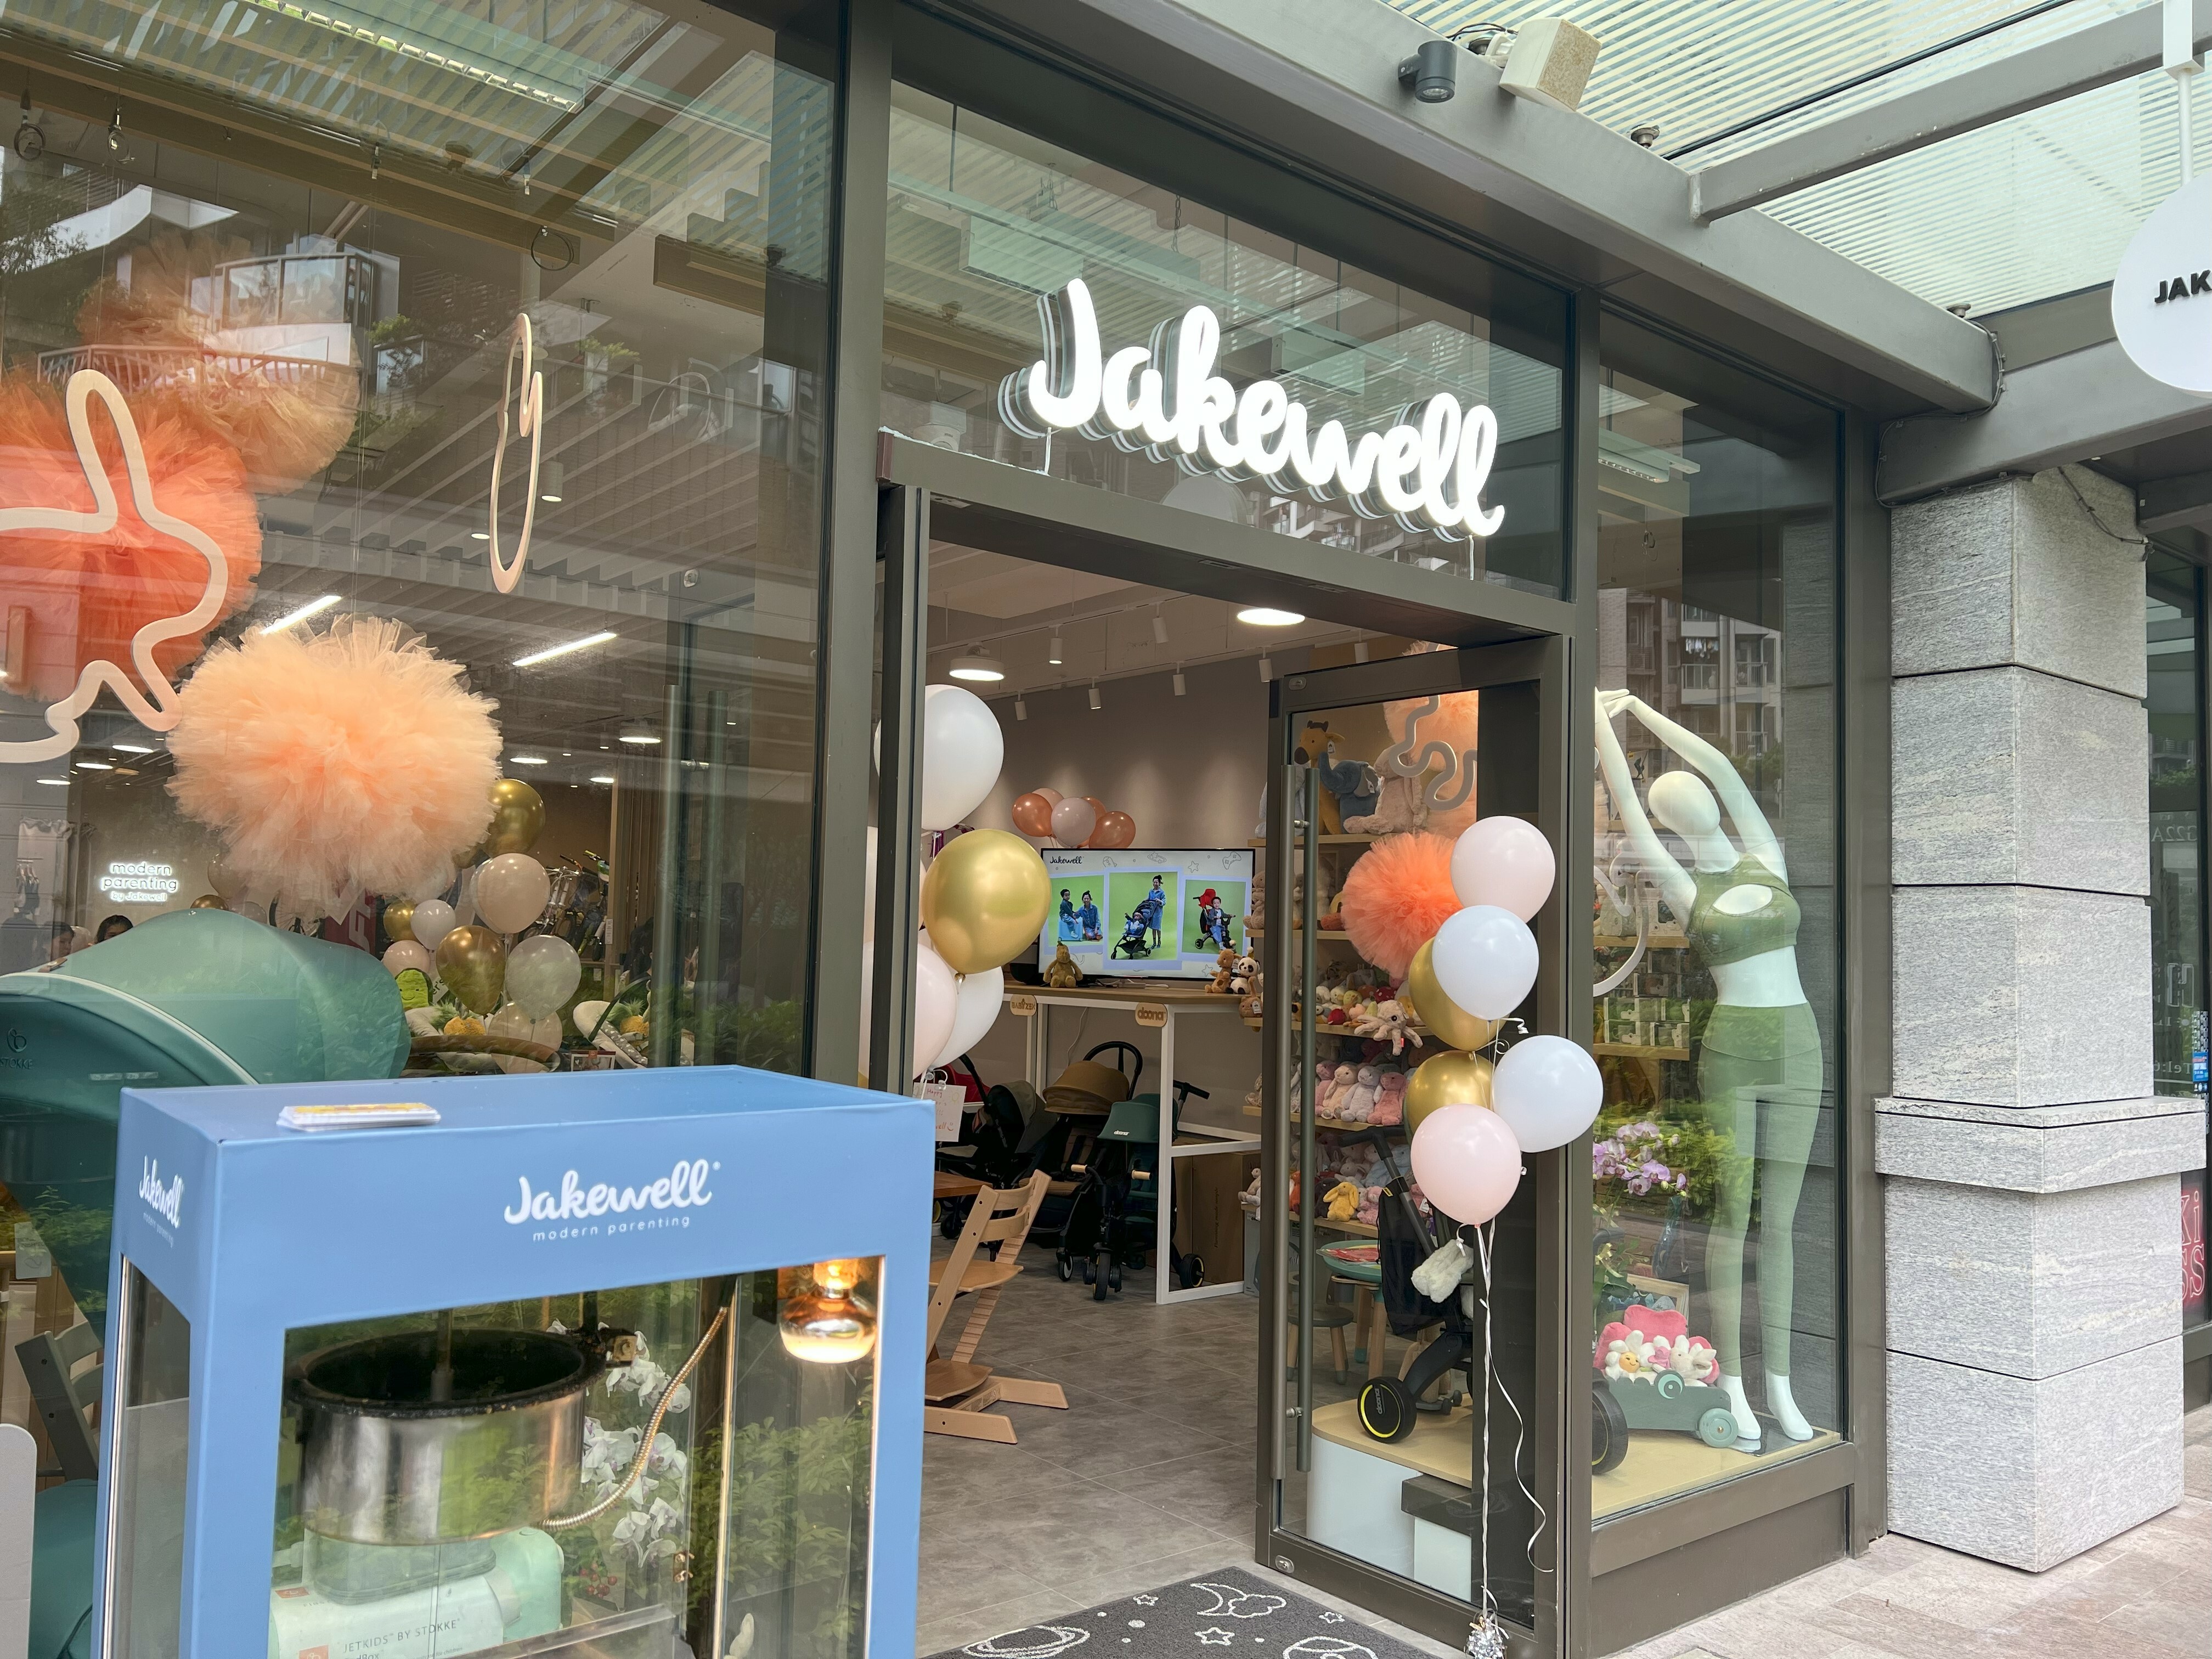 Jakewell新門市-Jakewell將軍澳門市-Jakewell opening